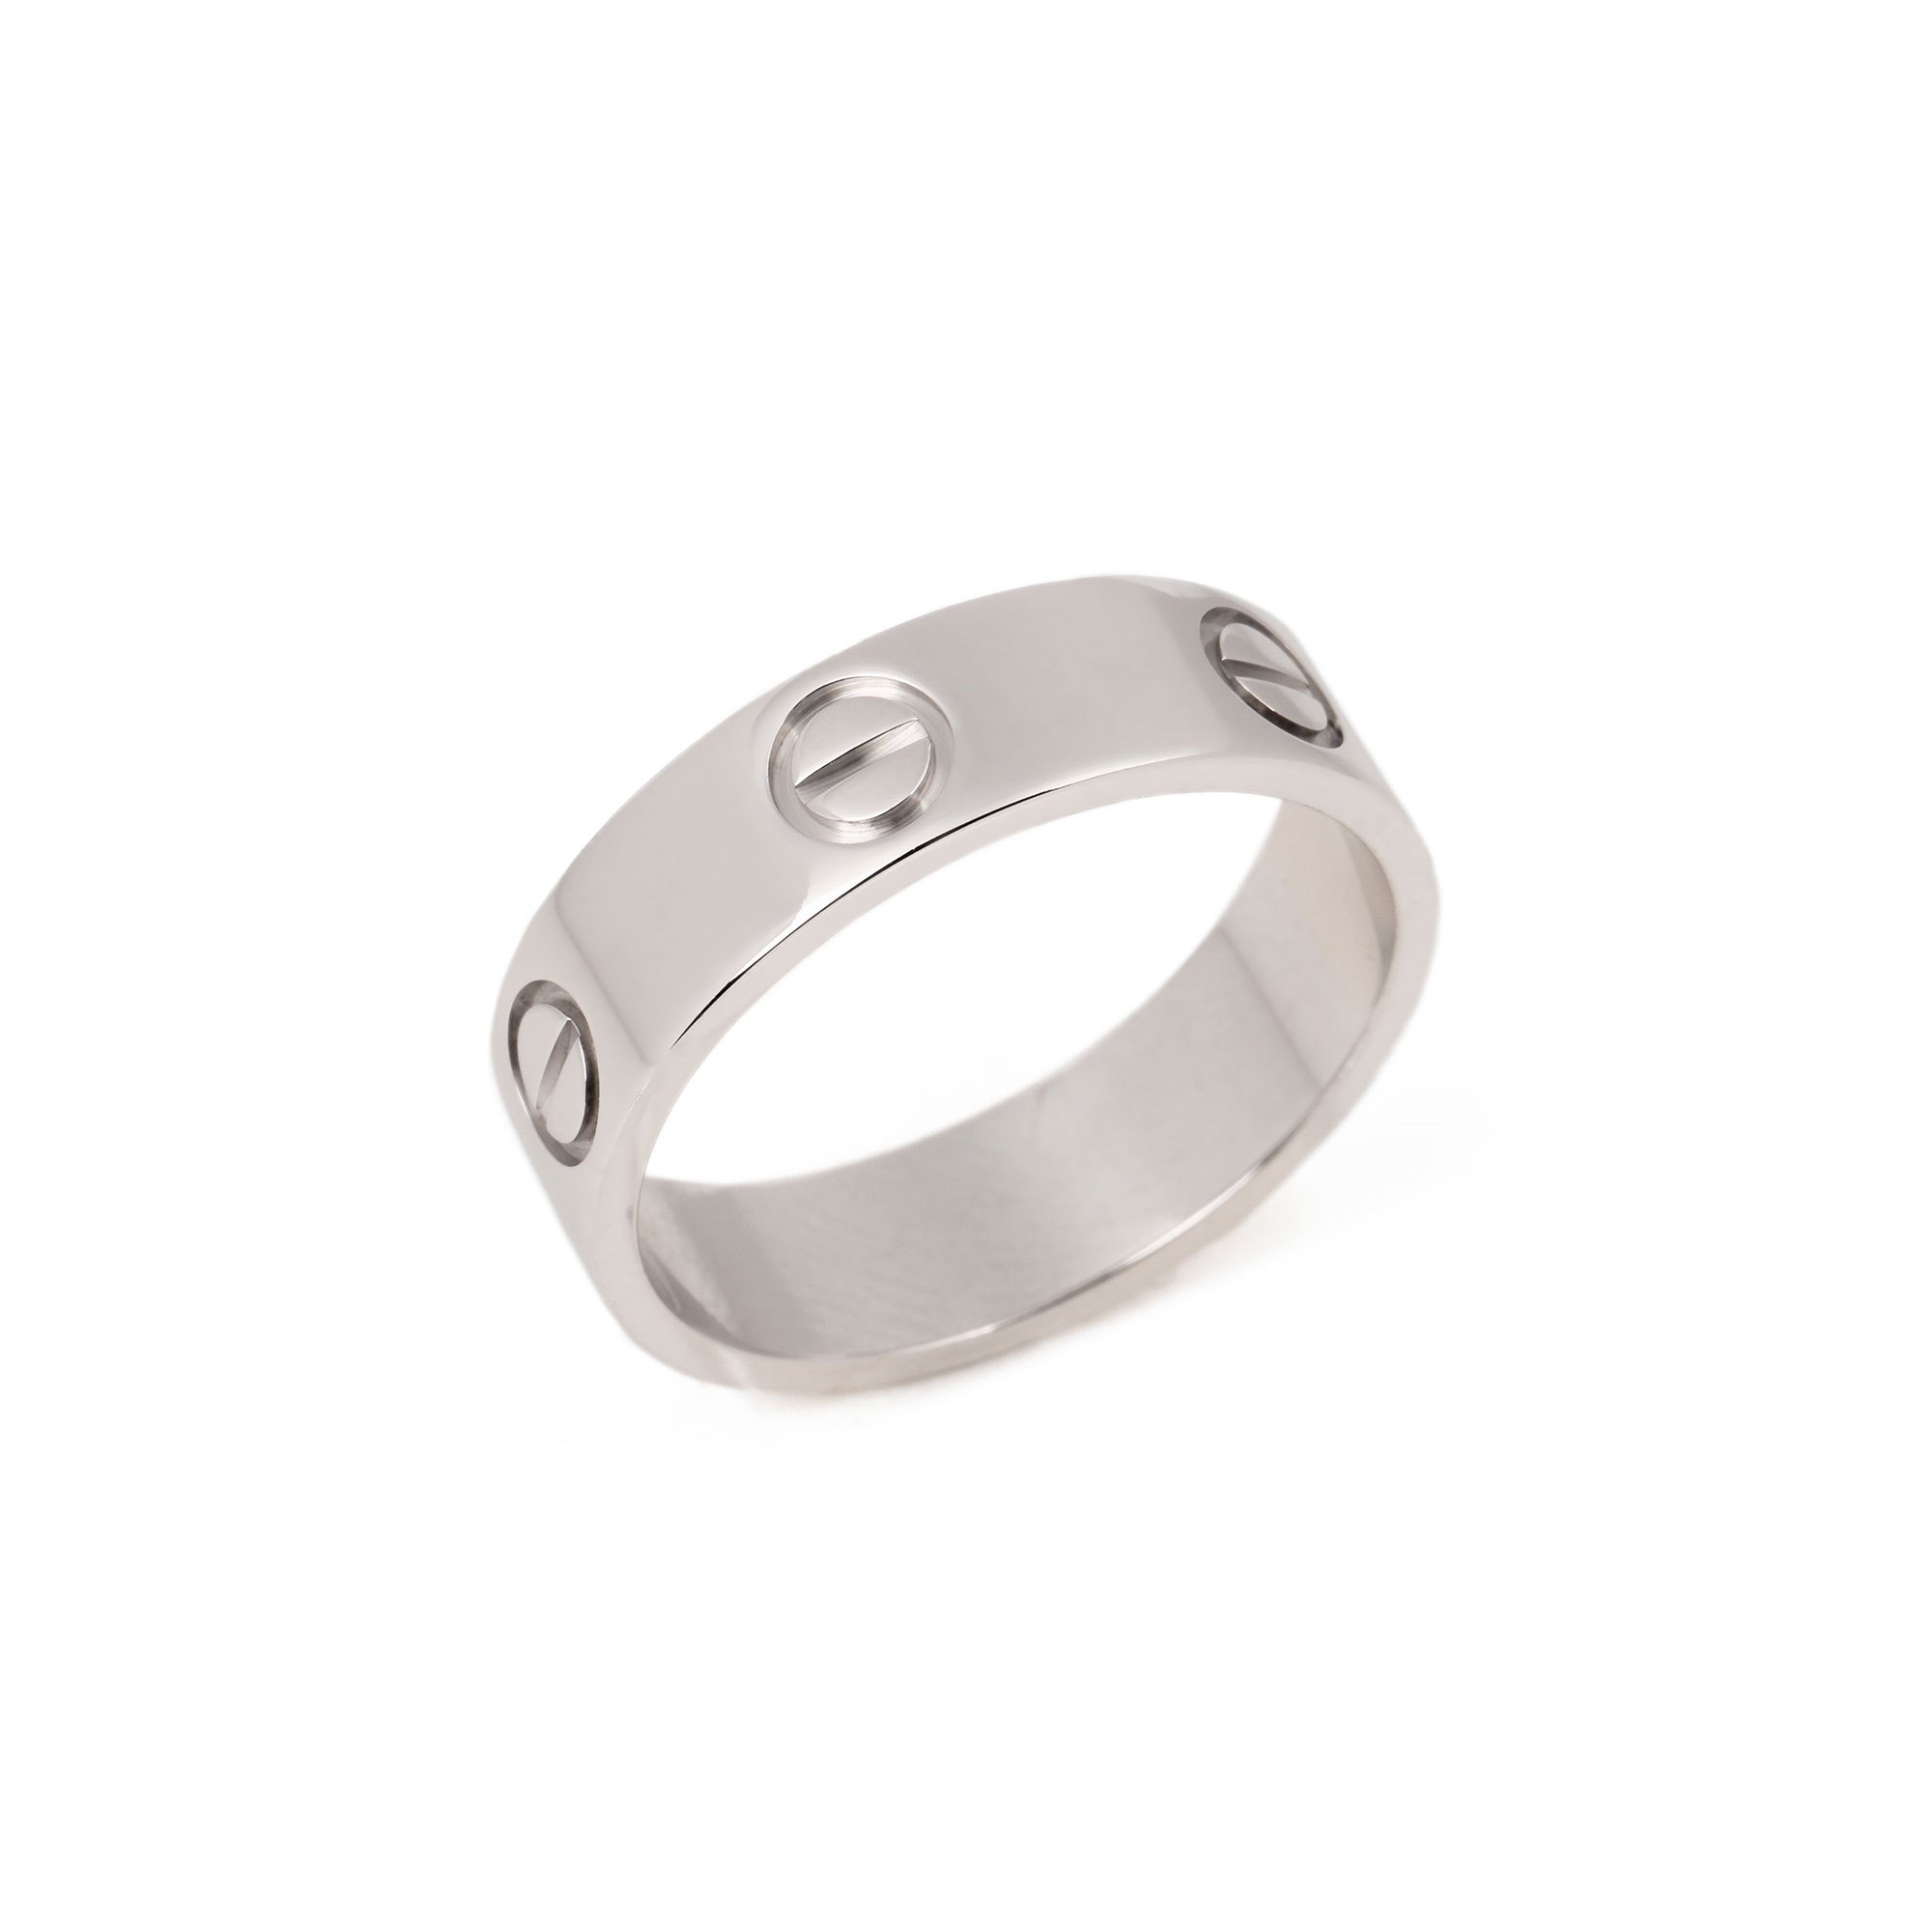 Cartier 18ct White Gold Love Ring